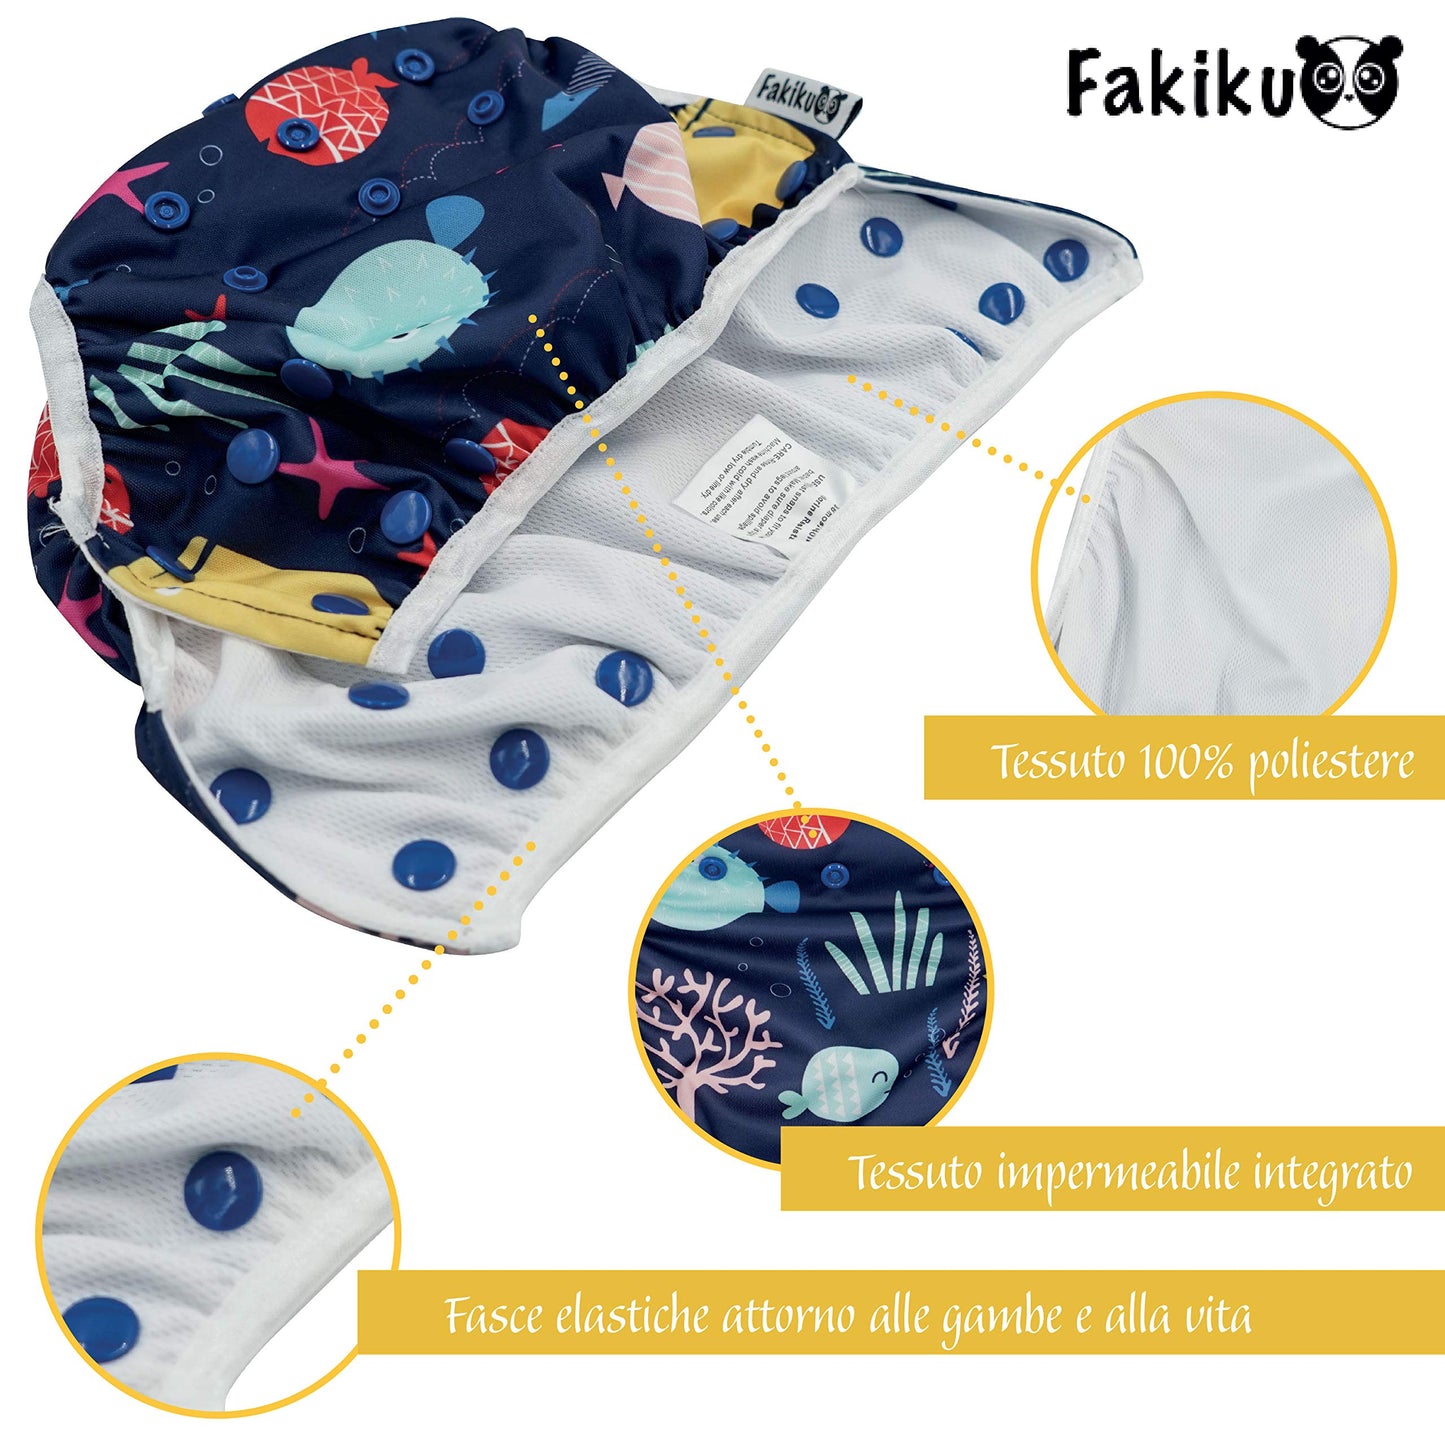 Fakiku Swim Baby Diapers Reusable - Washable Nappies Newborn for Child 0-3 Years Old - Adjustable Swimsuit Pool Kids Set Sea Ideal Swimming for Swim Lessons Swimwear Suit Pack of 2